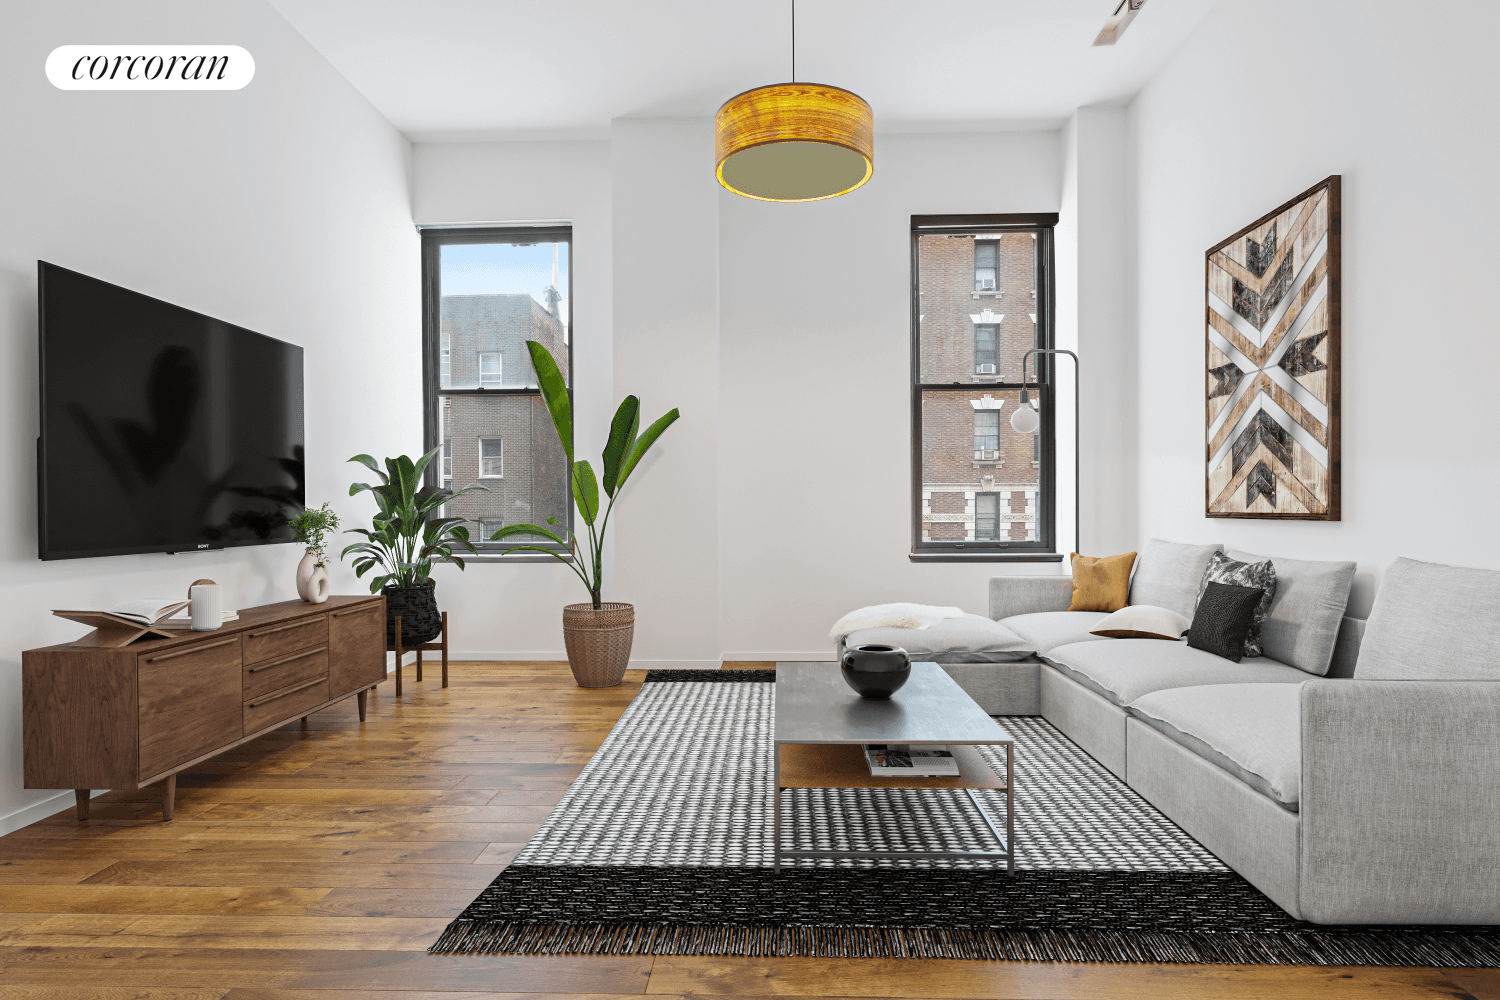 Located in Gramercy Park's elegant historic Rutherford Place at 305 Second Avenue, this massive 1900 square foot 2 bed, 2 bath triplex condo with loft and private patio is designed ...